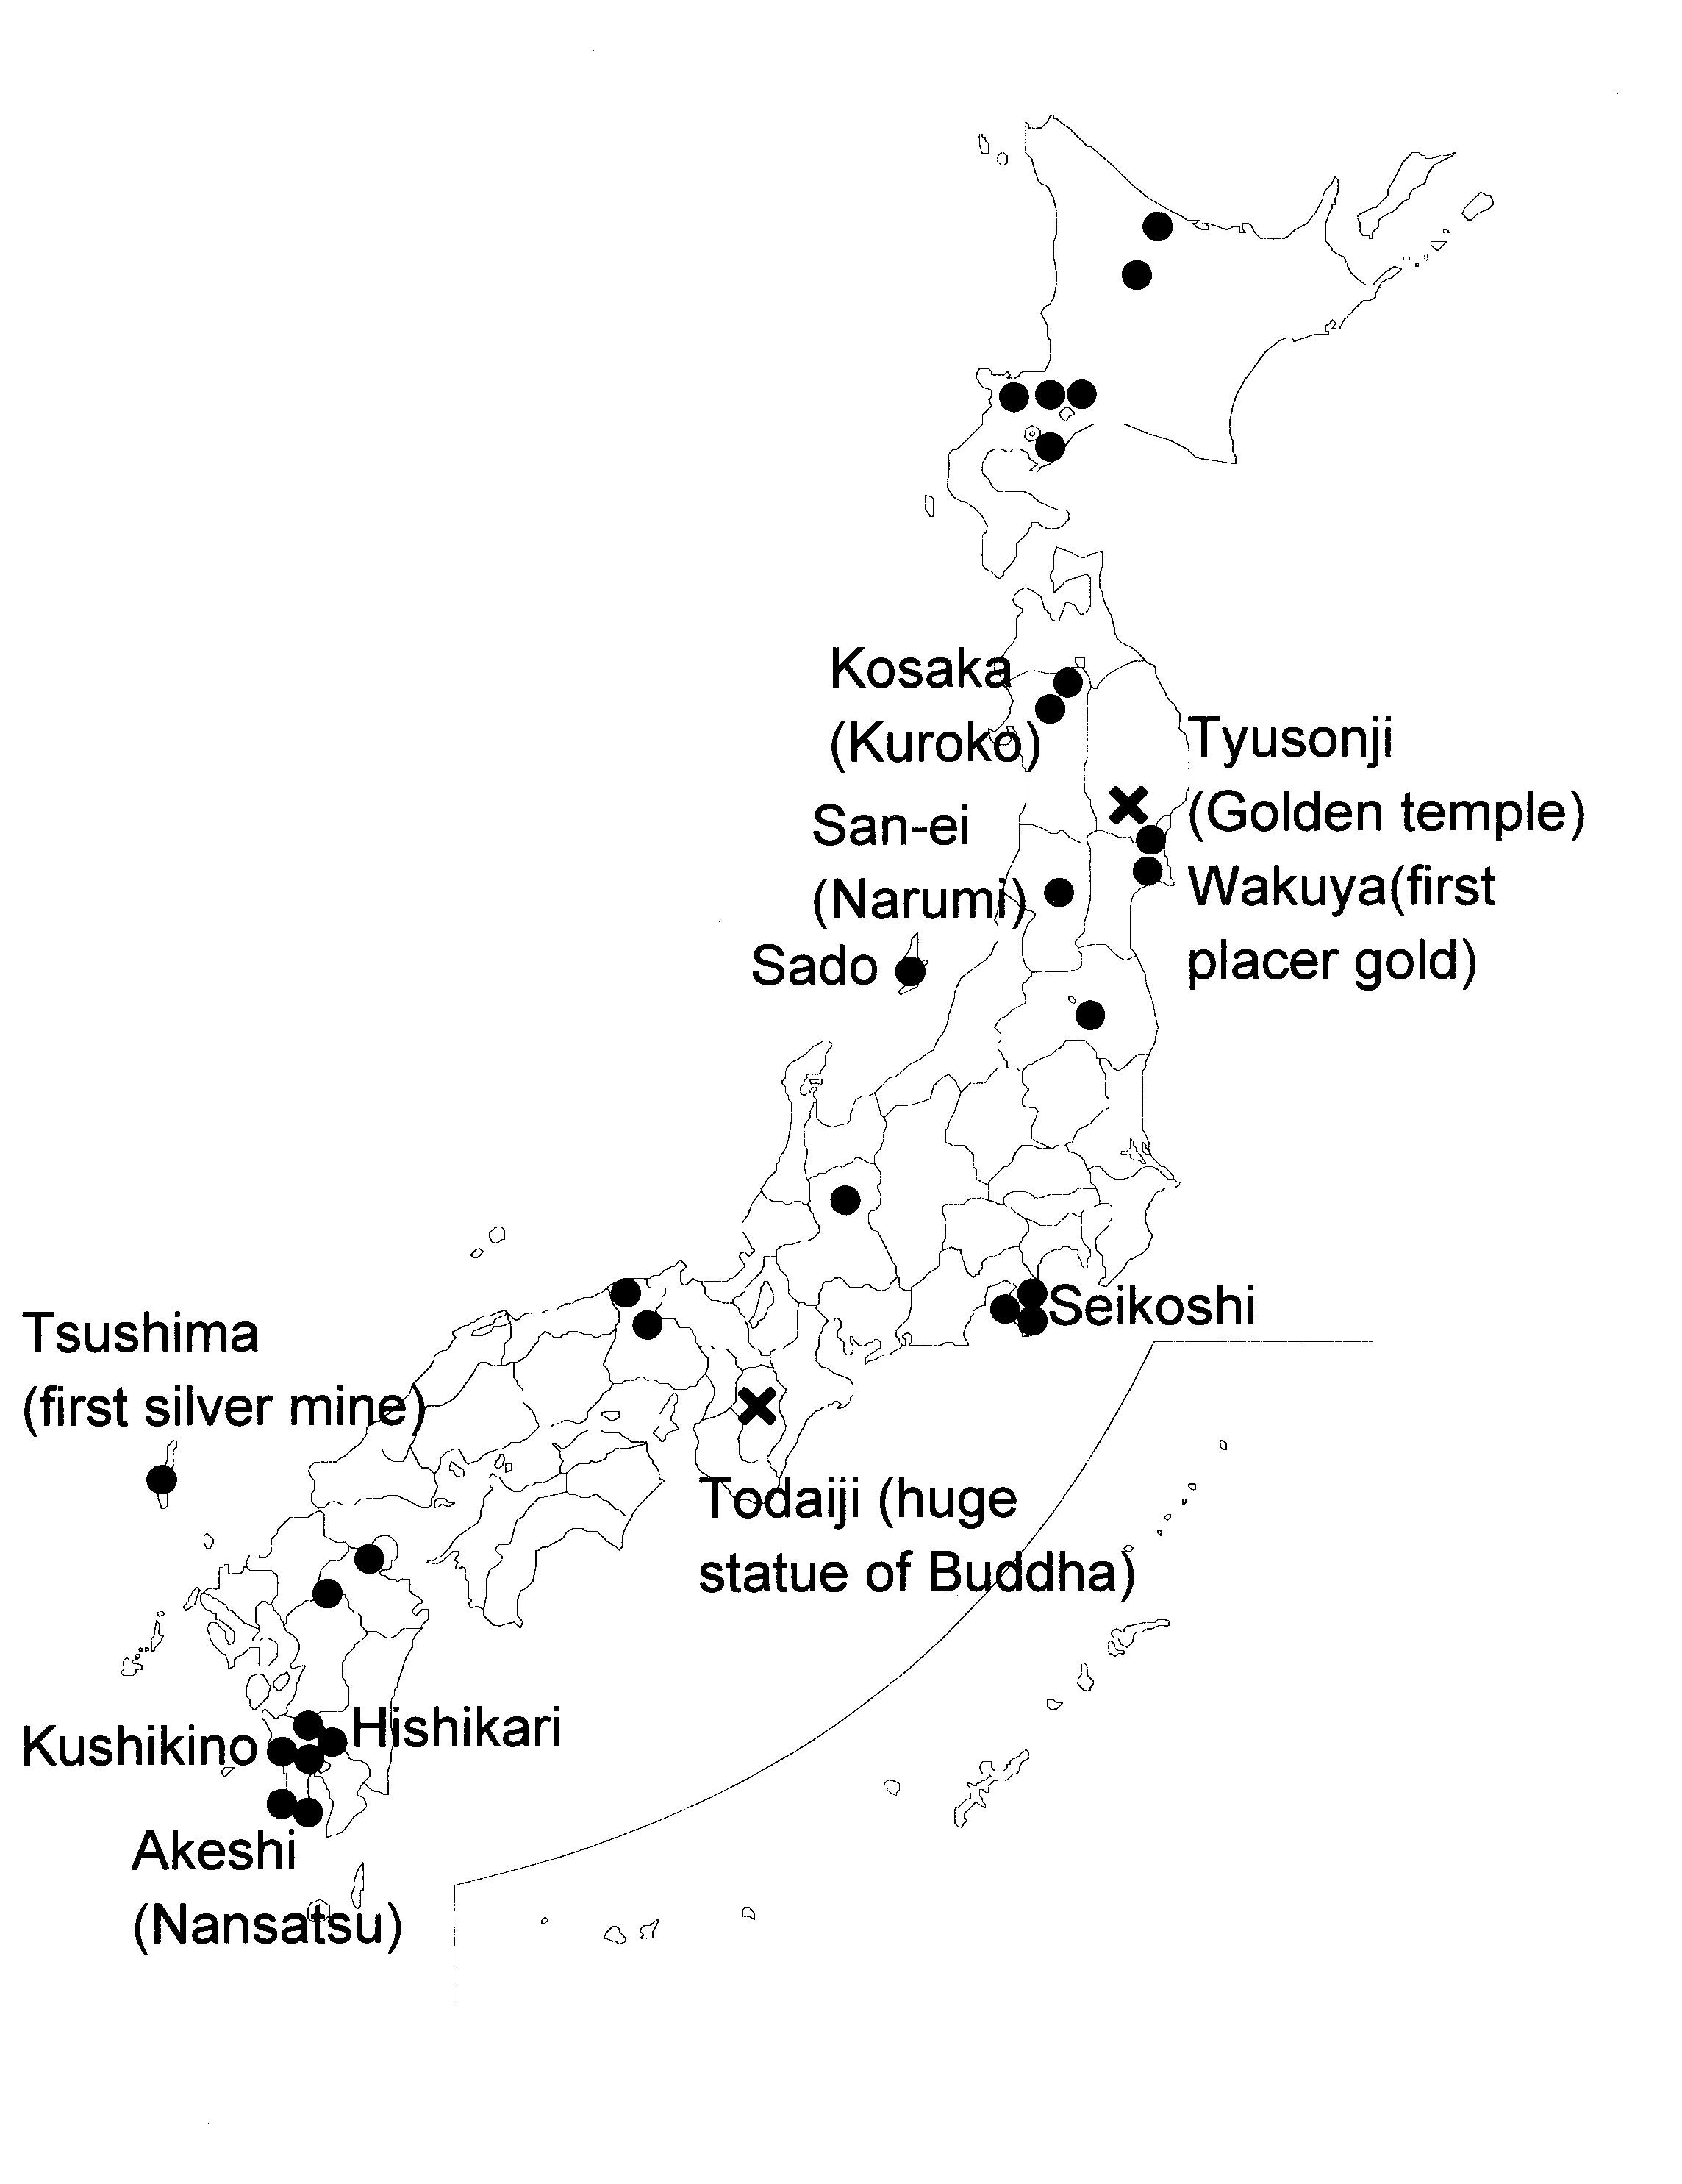 Map illustrating the position of Japanese gold deposits, mining areas and places mentioned in the text